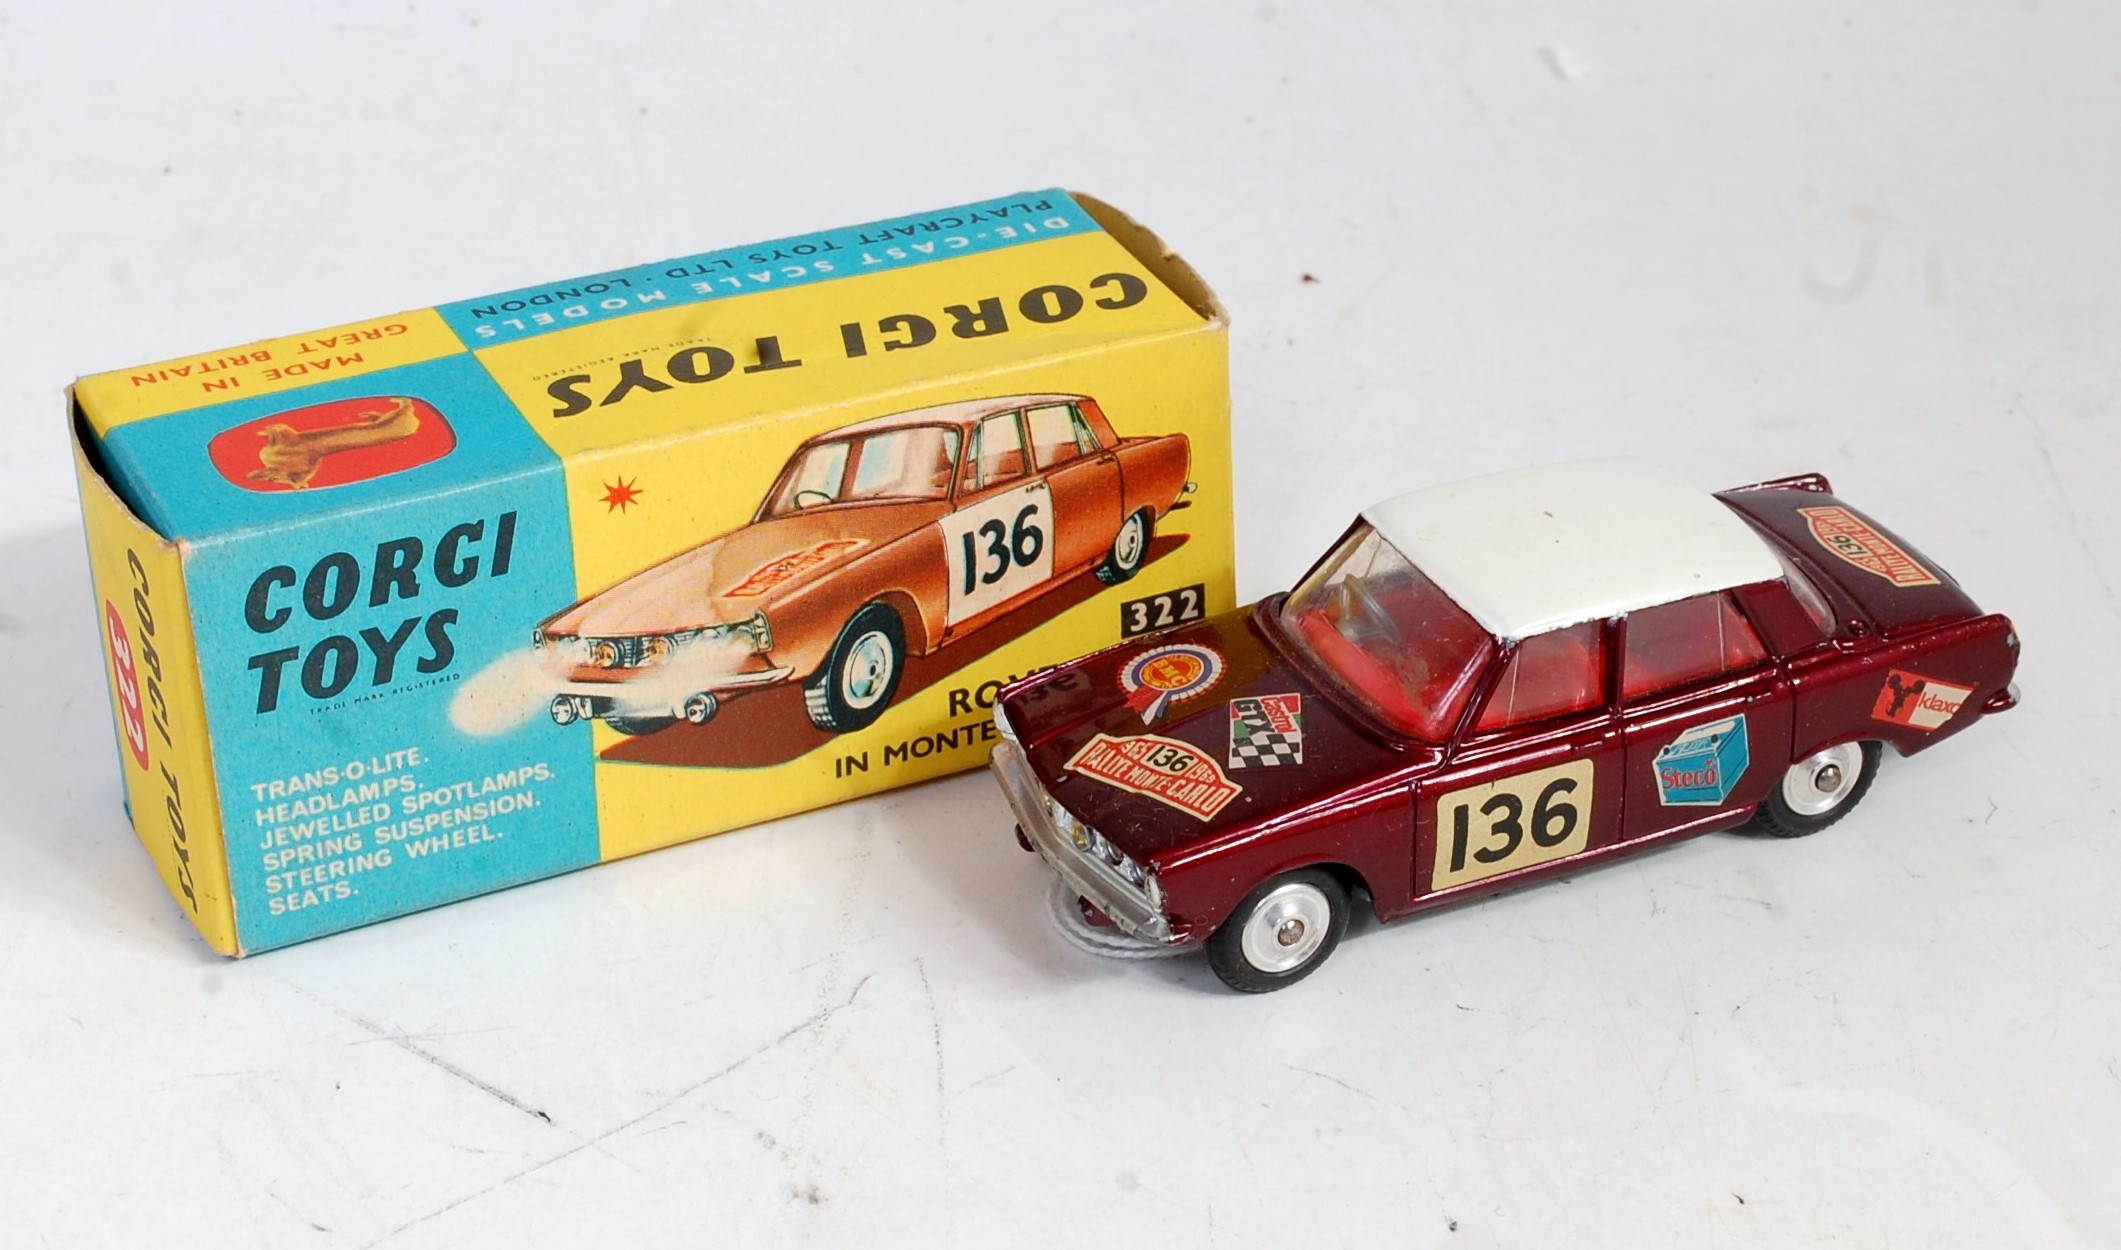 A Corgi Toys No. 332 Rover 2000 in Monte Carlo trim comprising of metallic maroon body with red